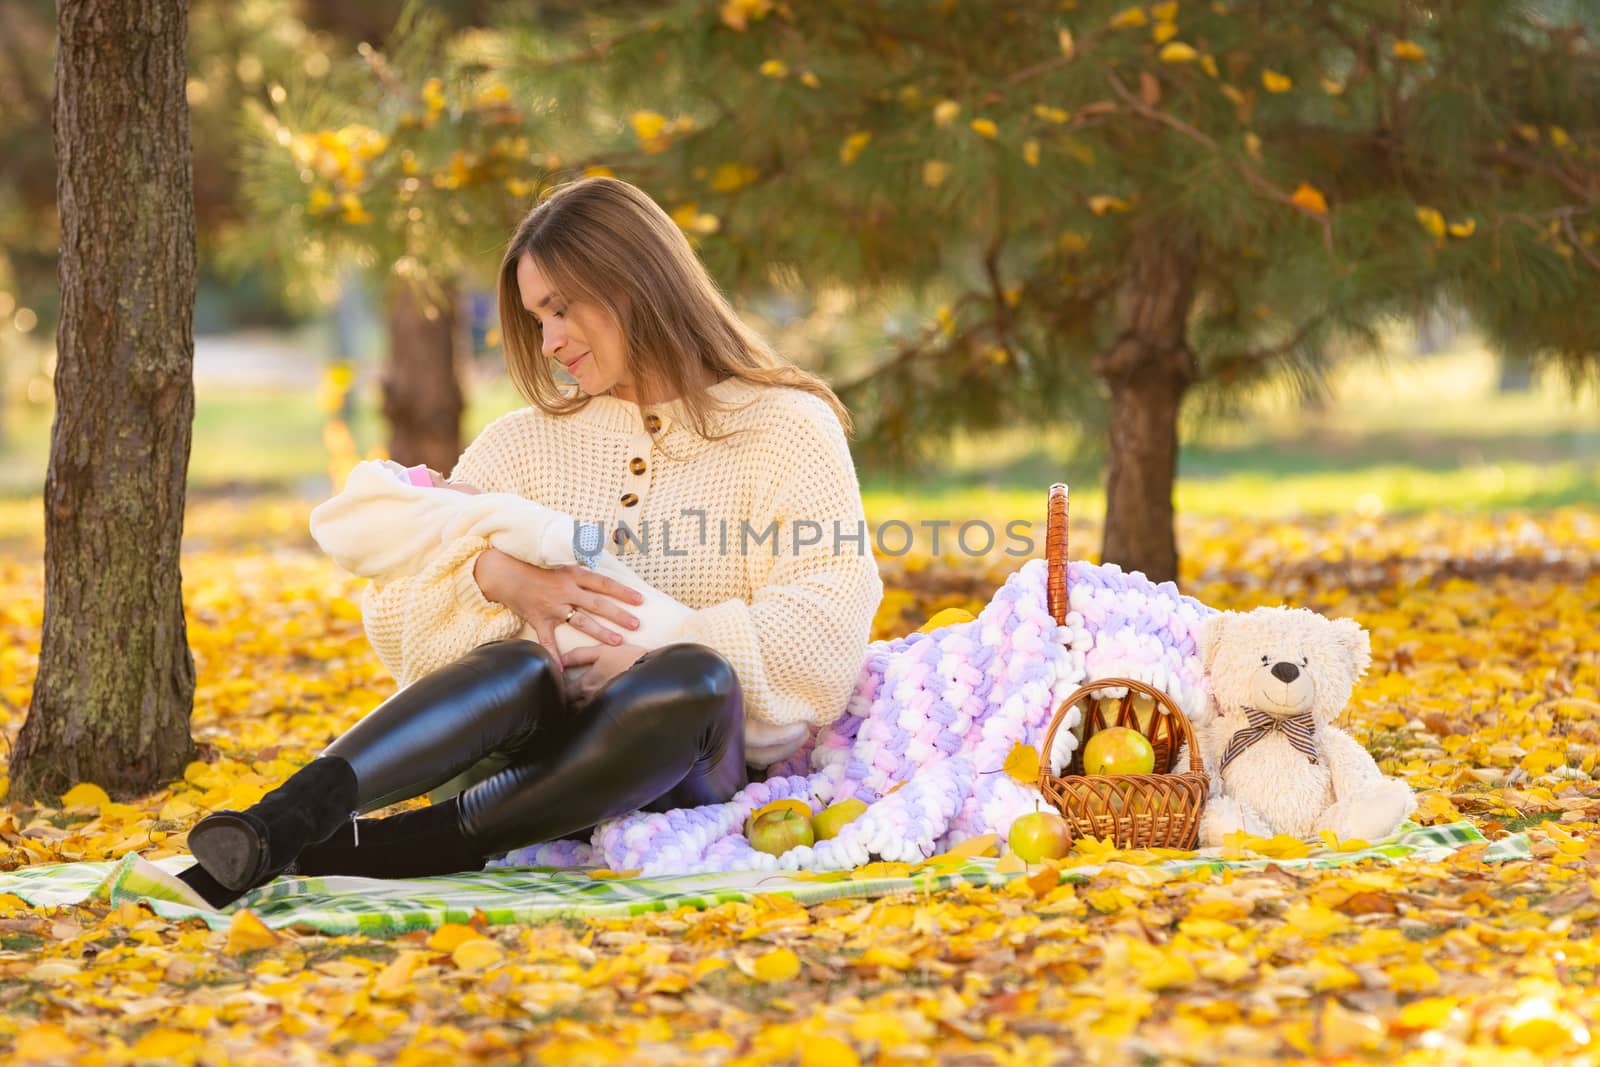 Mom and baby on a picnic in the city park in the autumn